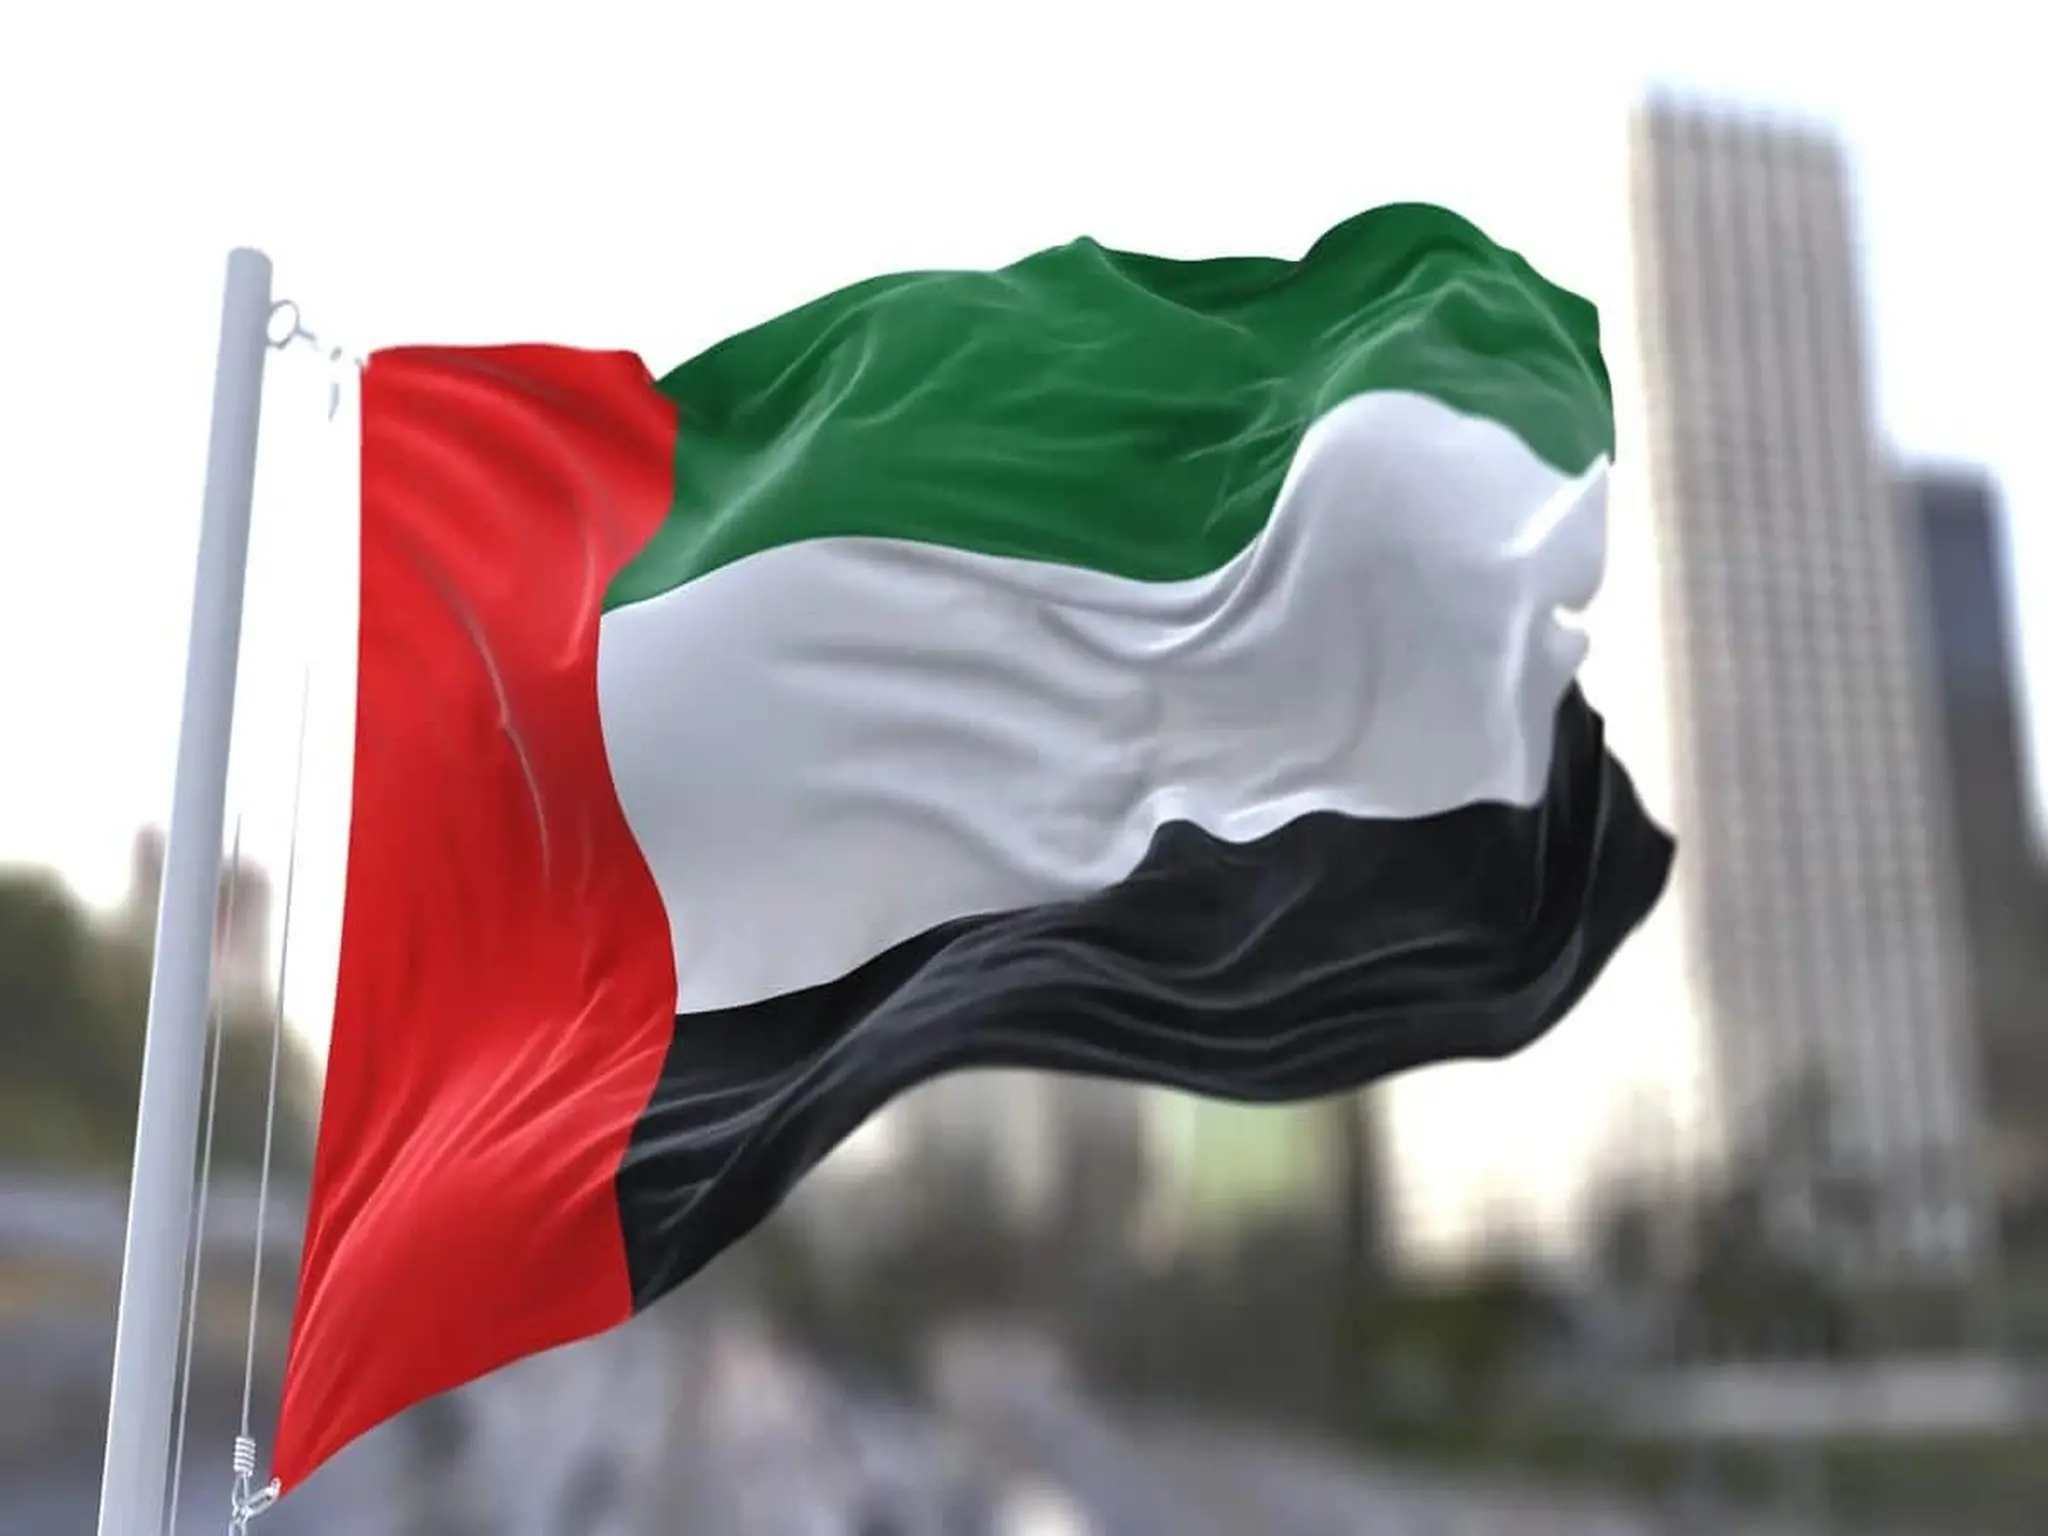 The UAE issues a severe warning to residents and citizens regarding safety